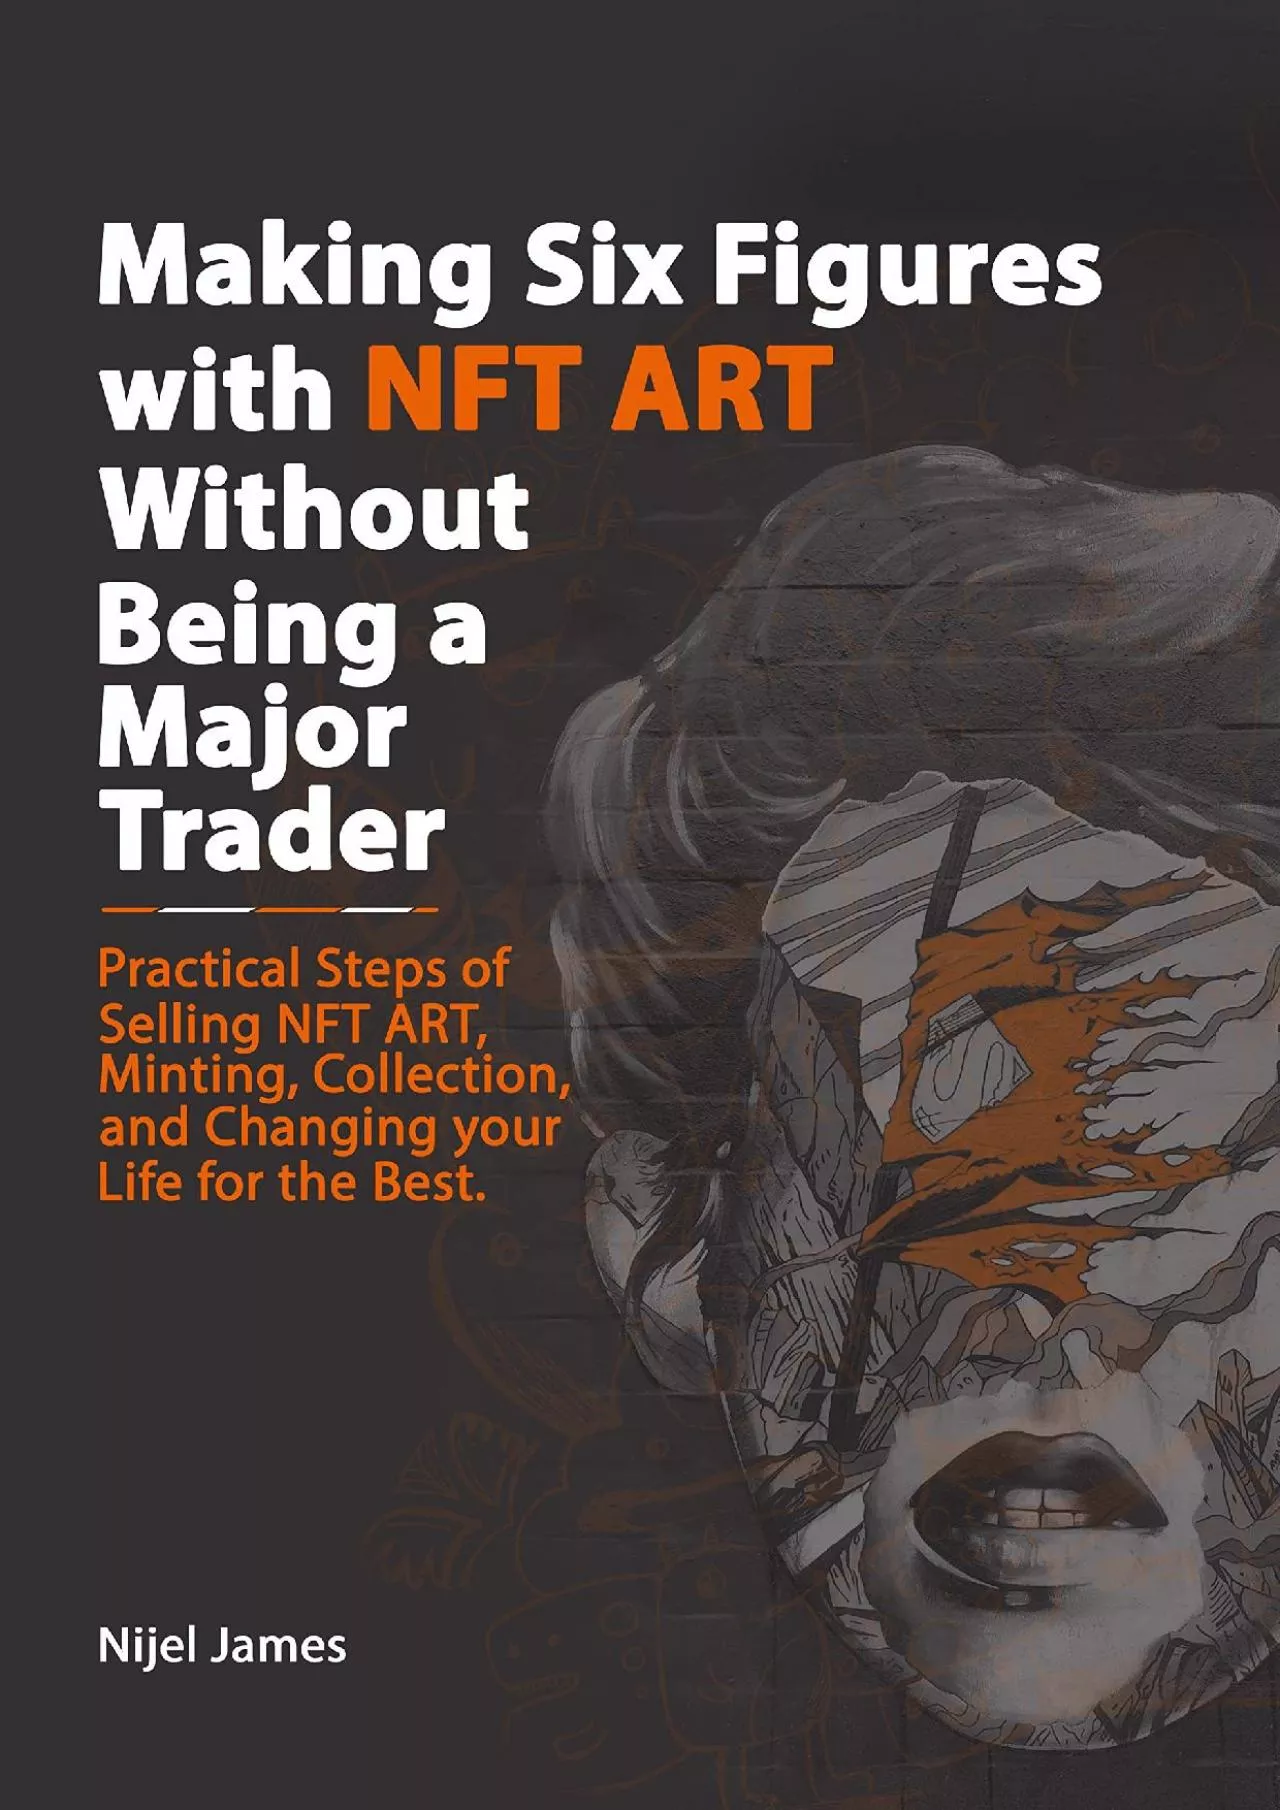 (BOOK)-Making Six Figures with NFT ART Without Being a Major Trader (NFT and Metaverse